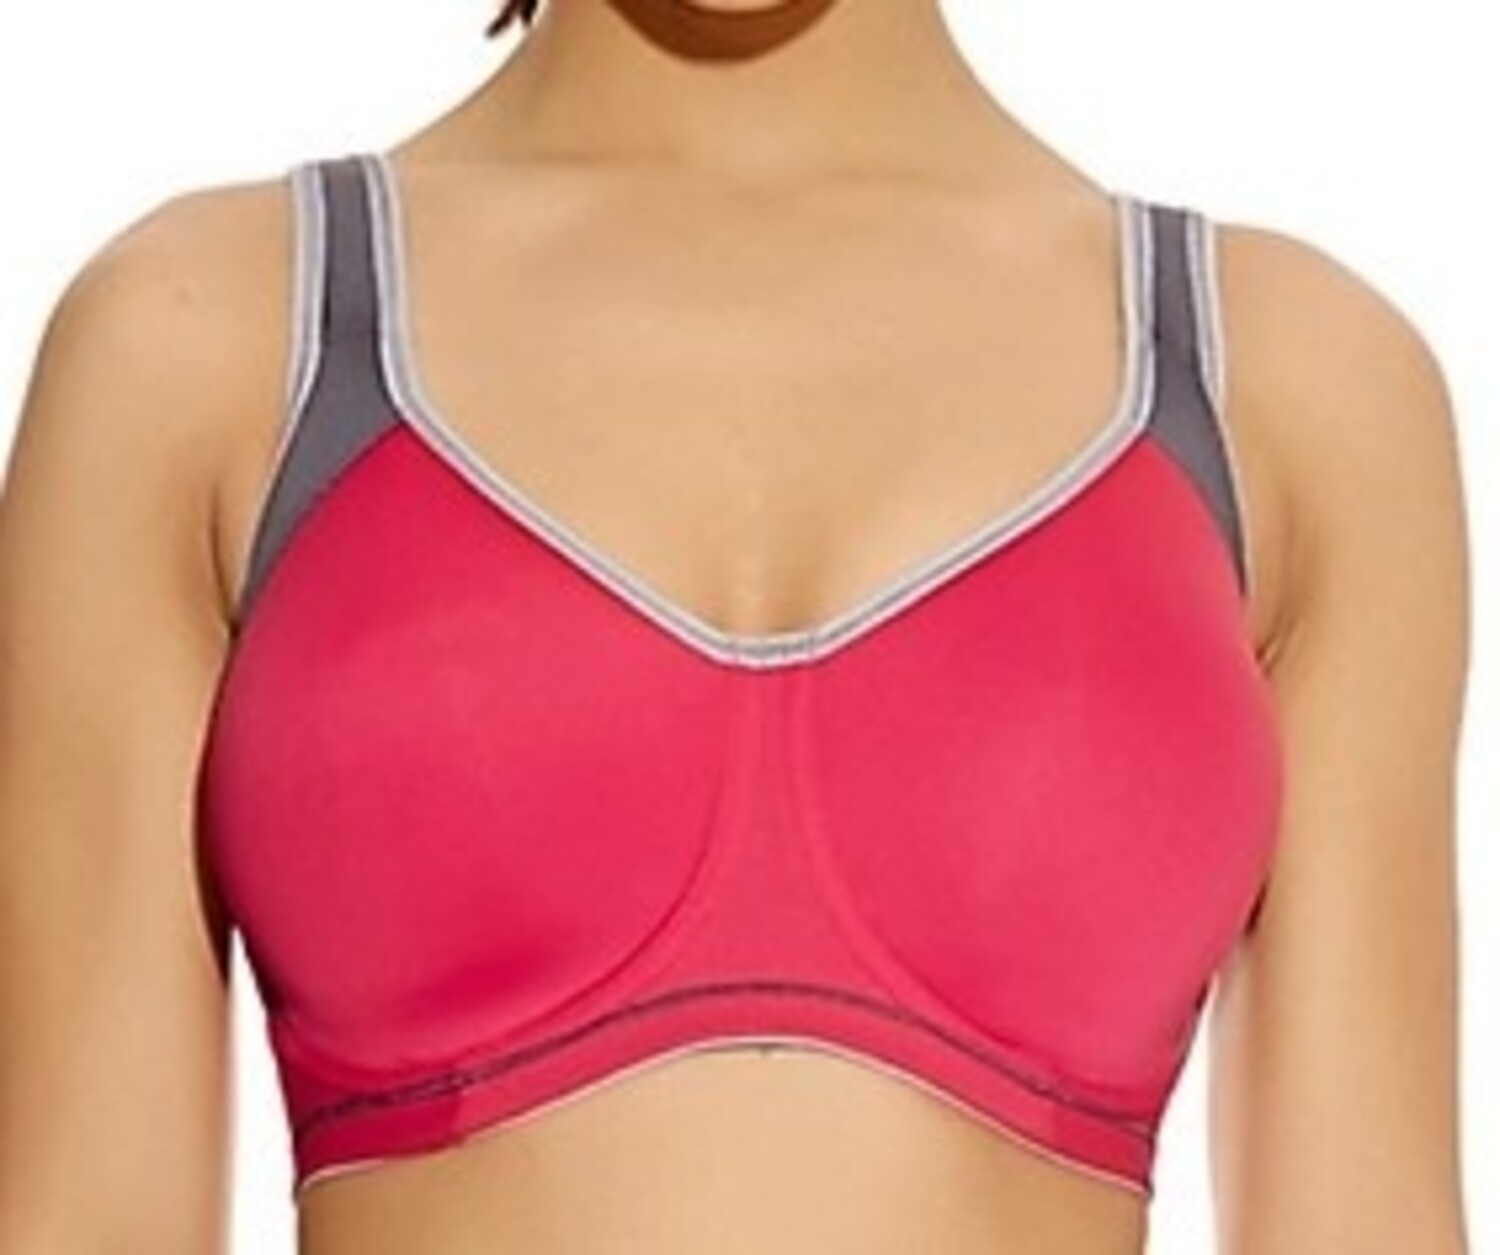 Freya Active AA4892 Underwire Sports Bra Charcoal Gray Pink Green Size 32G  US 